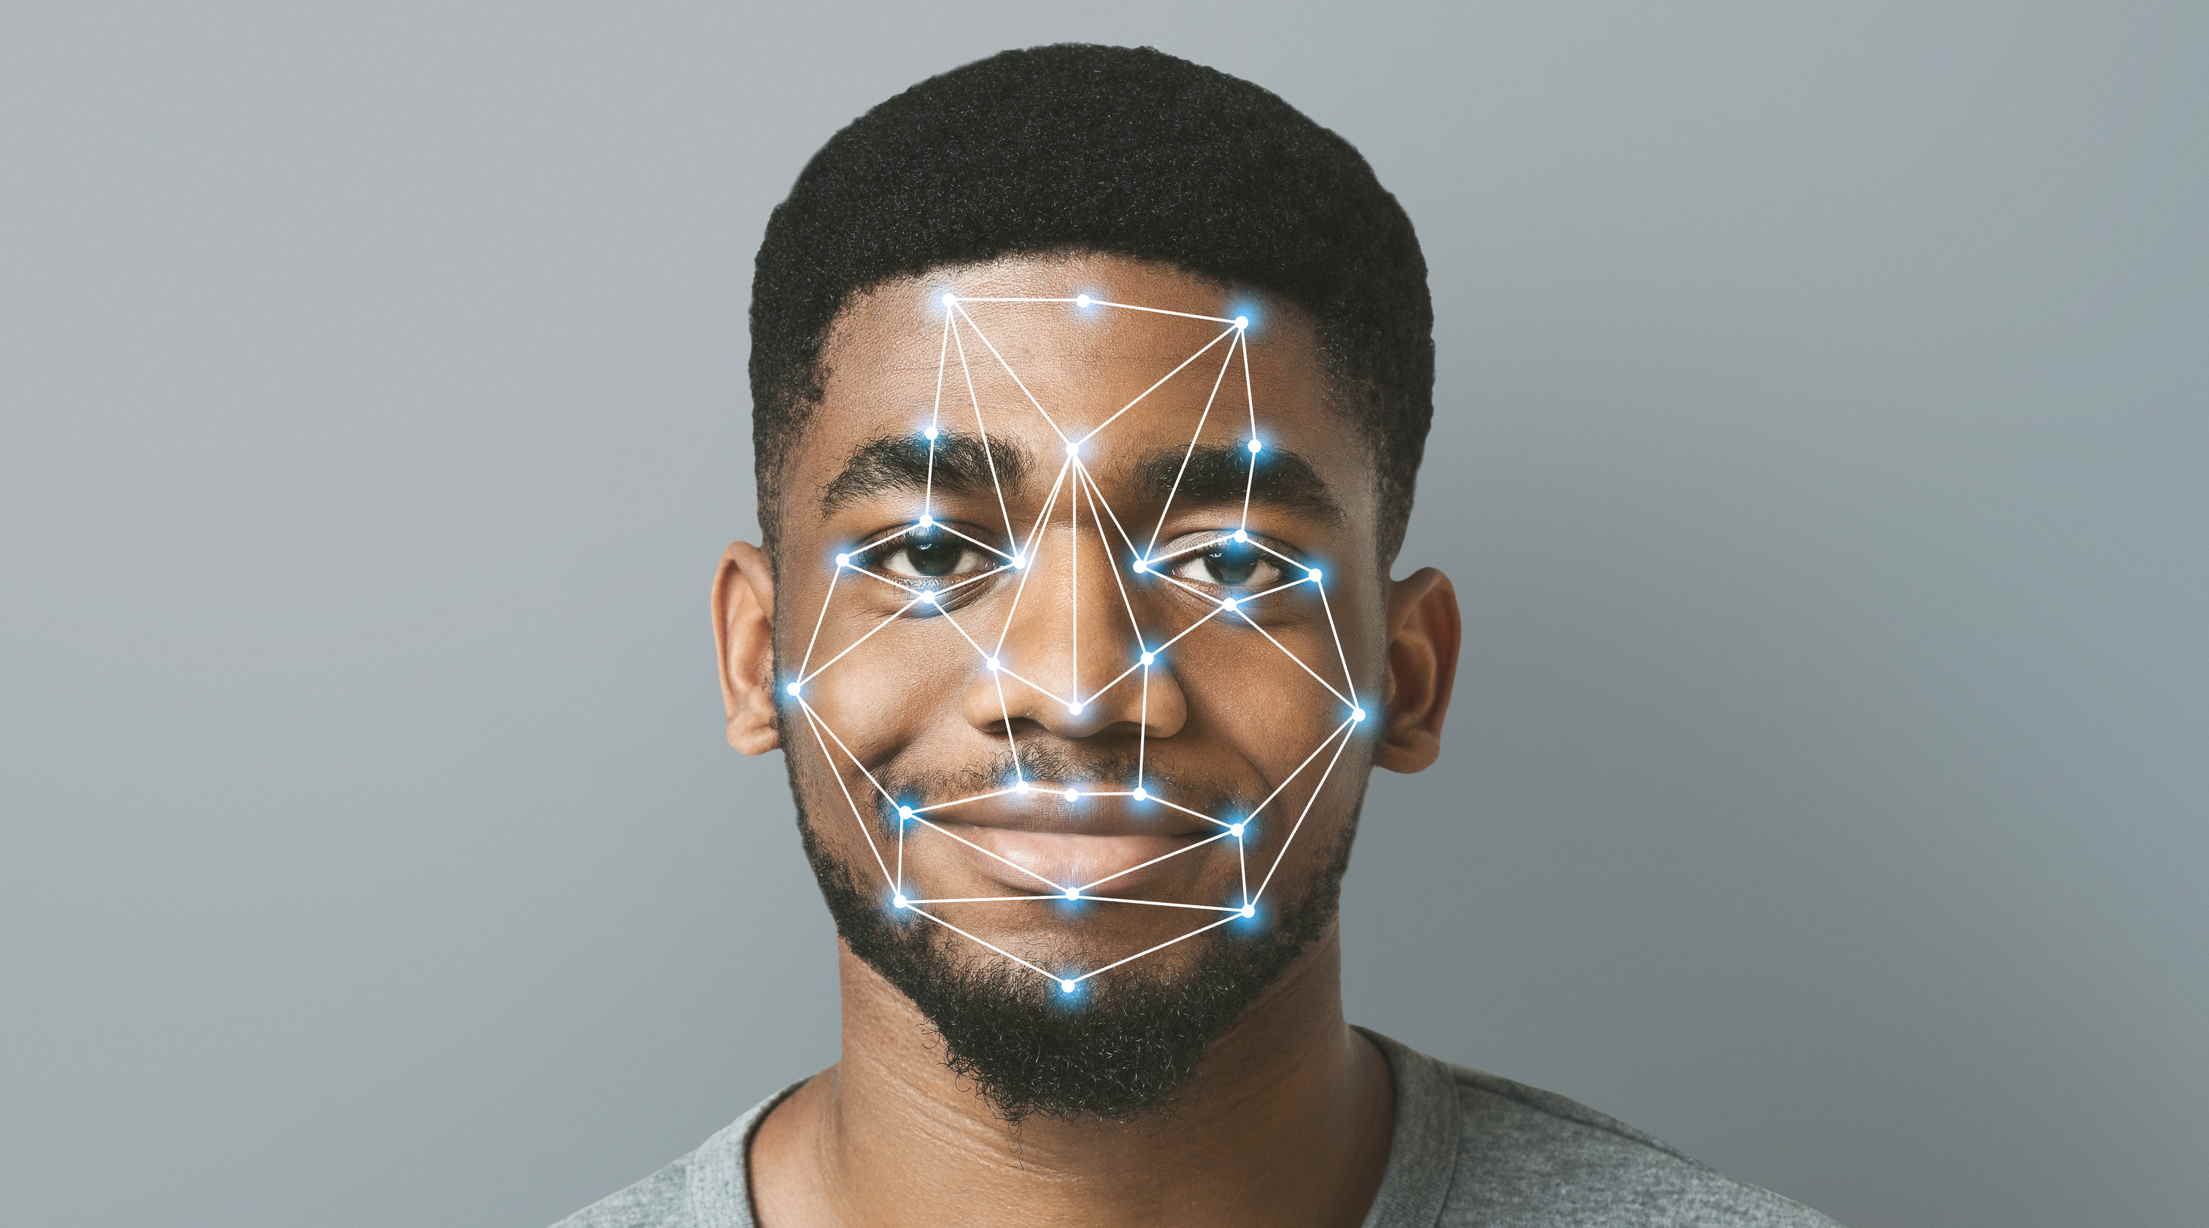 Facial recognition tech to reopen key sectors | G7 series